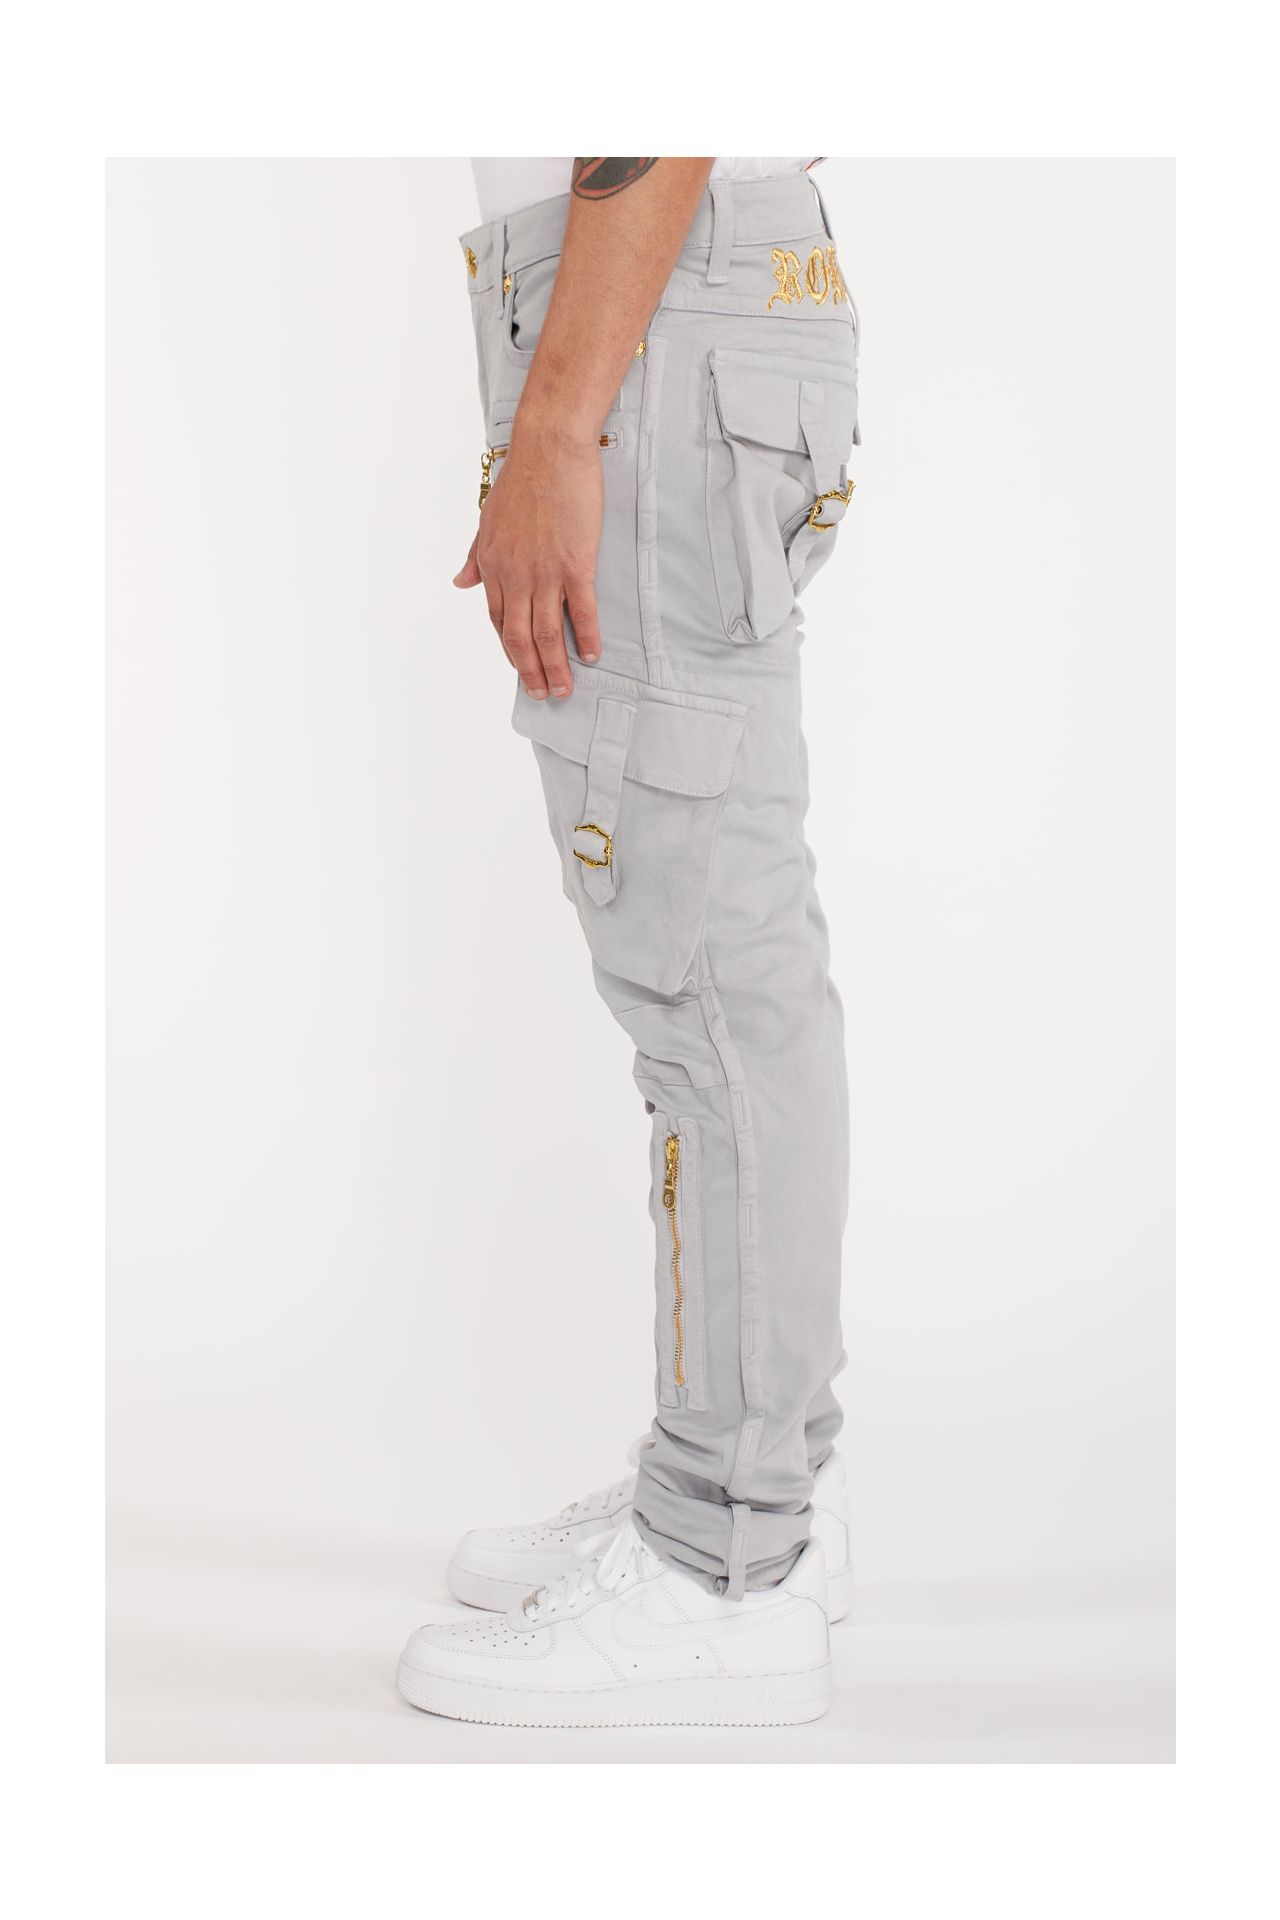 MILITARY STYLE MENS CARGO PANTS IN GRAY